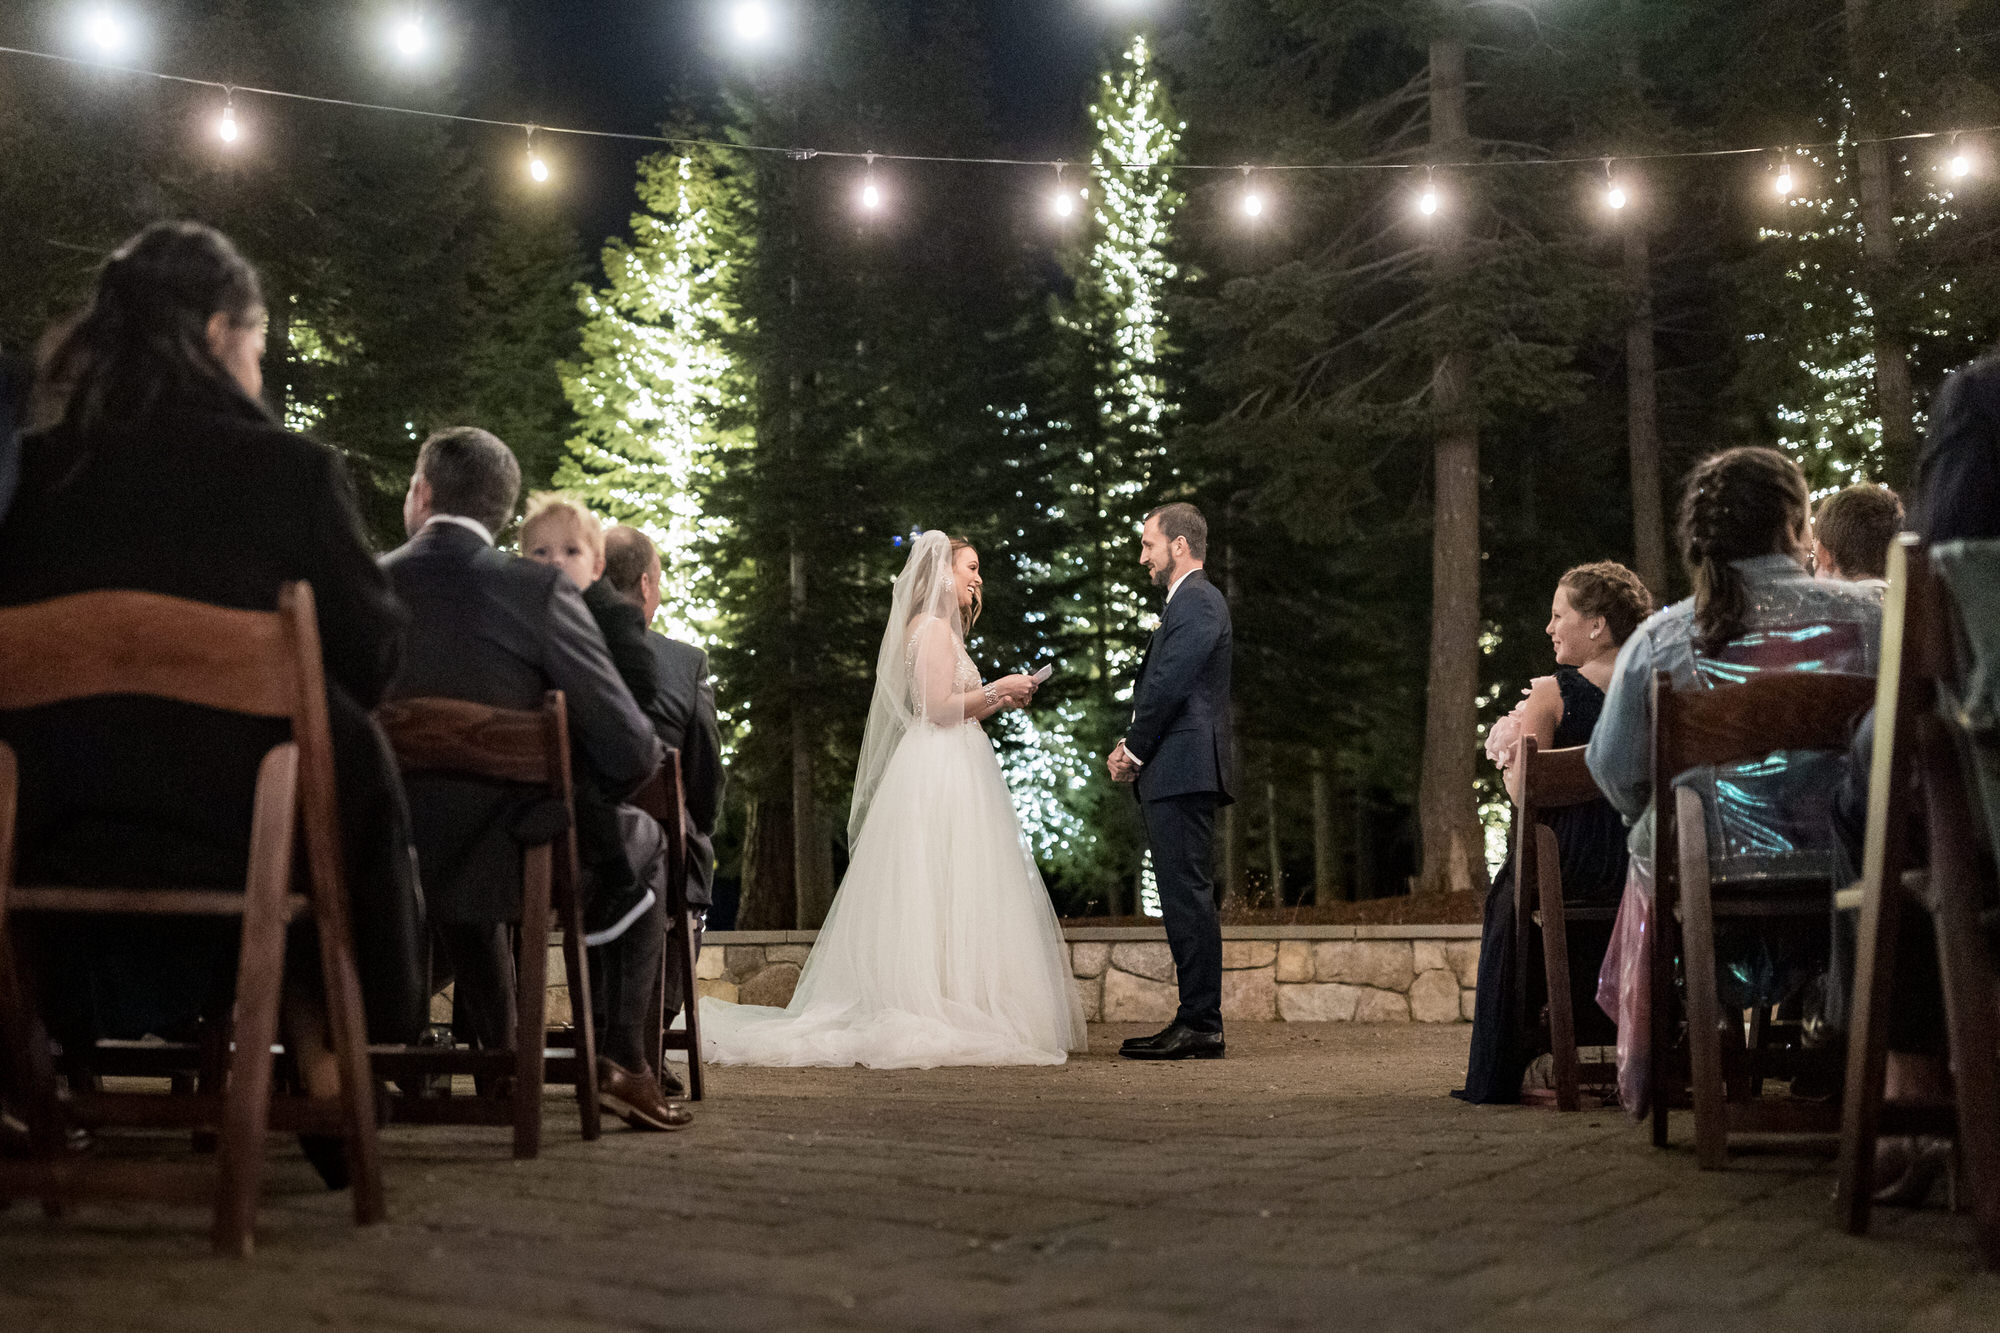 Wide angle view of a night ceremony with pine trees and string lights in the background.